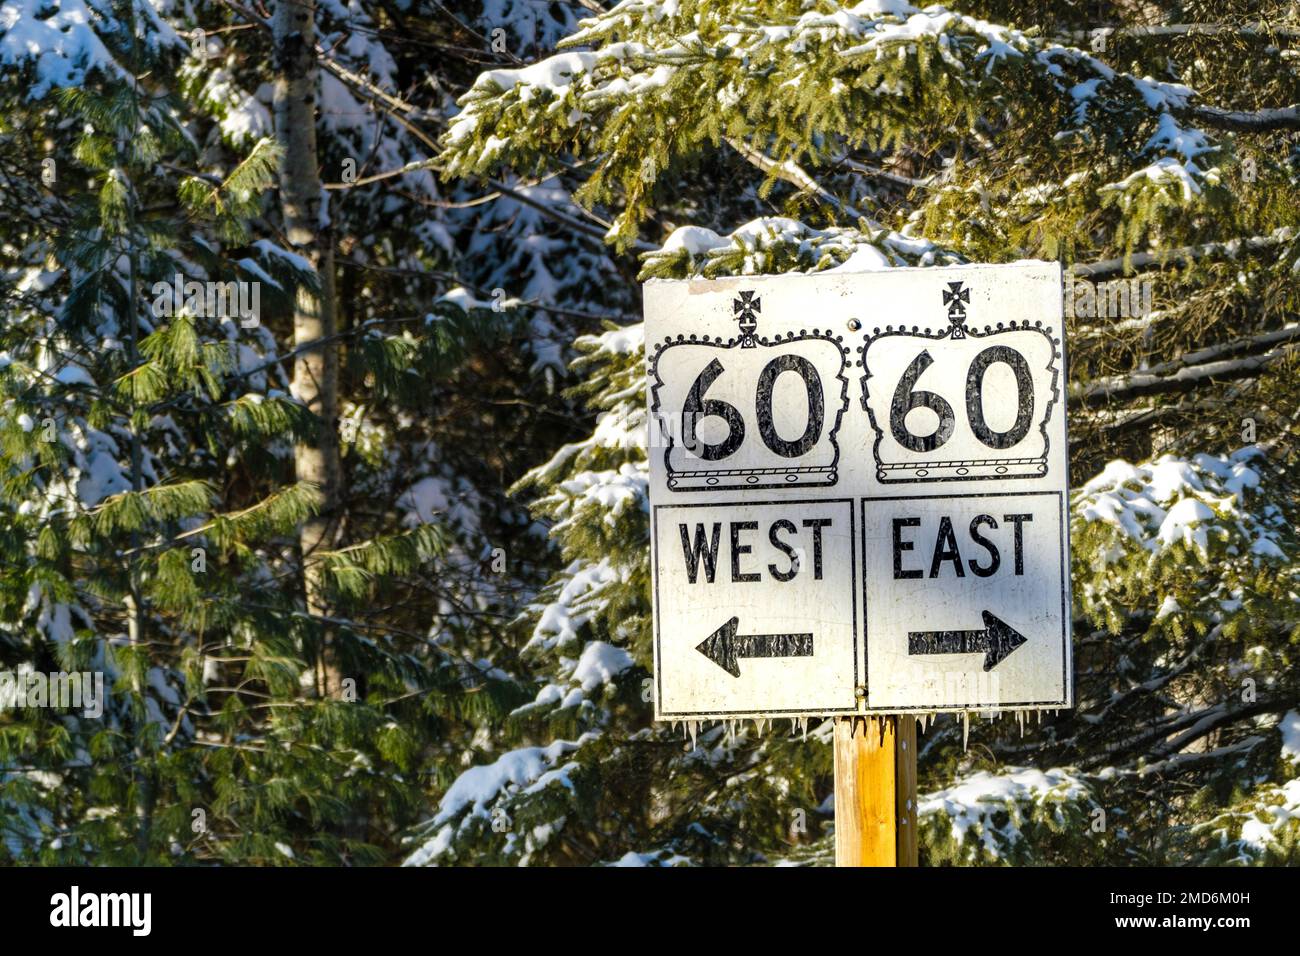 Algonquin Provincial Park, Ontario, Canada - January 14, 2023: Road signs direct traffic to the east and west along Ontario provincial highway 60. Stock Photo